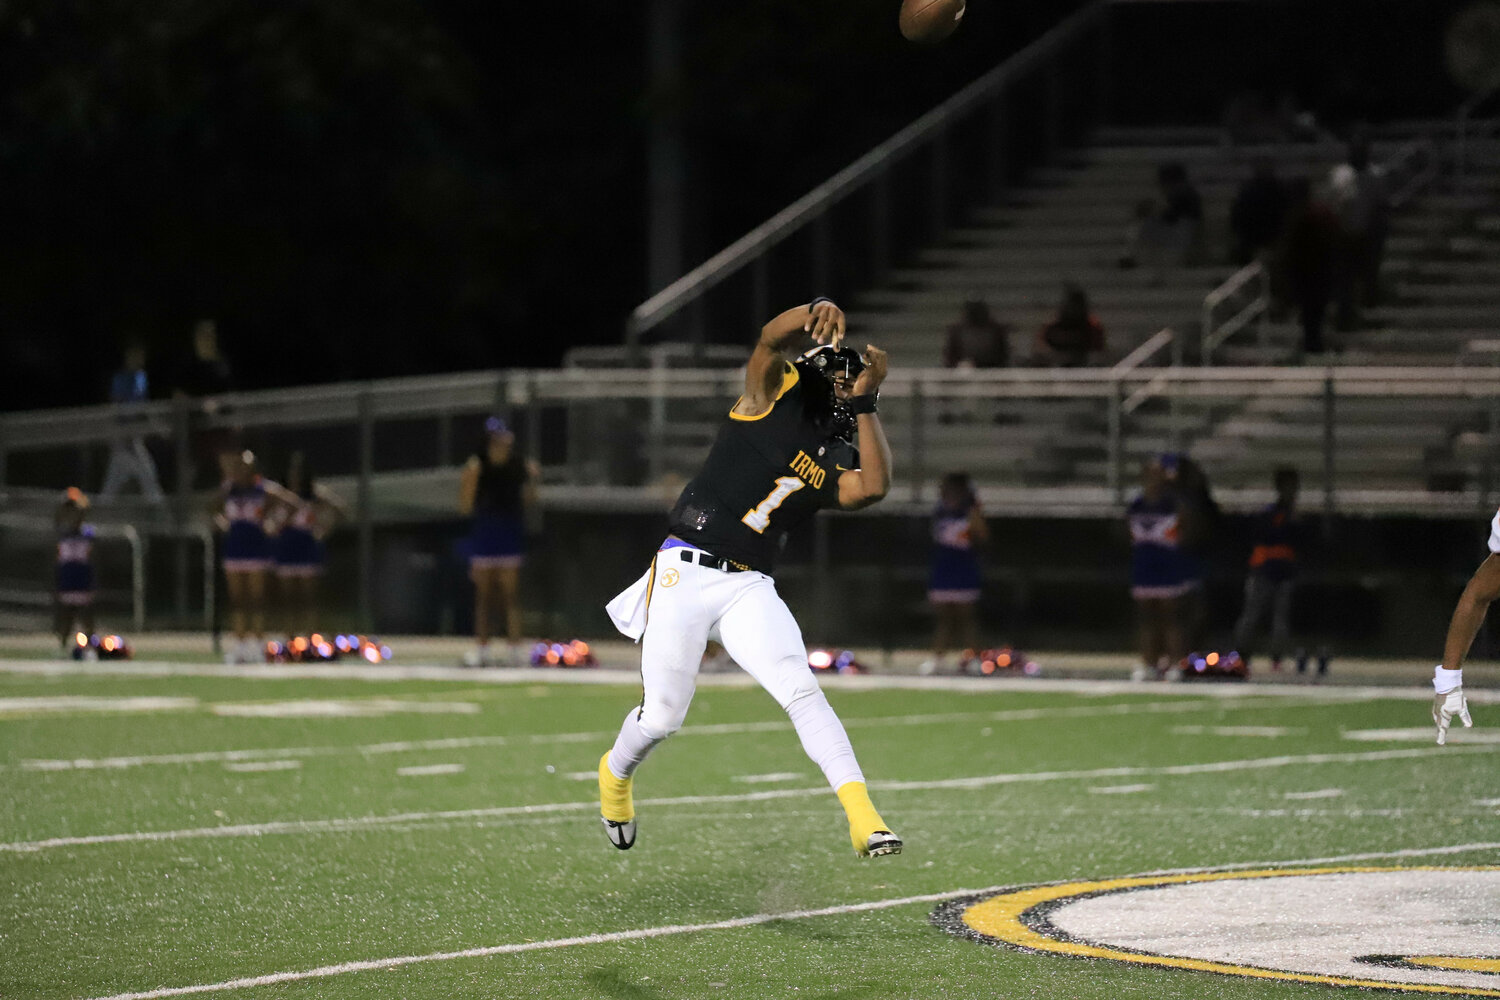 A.J. Brand launches one of his two touchdown passes as he outplayed highly touted Richland Northeast QB and NC State commit Will Wilson in Irmo's dominant 63-8 win.